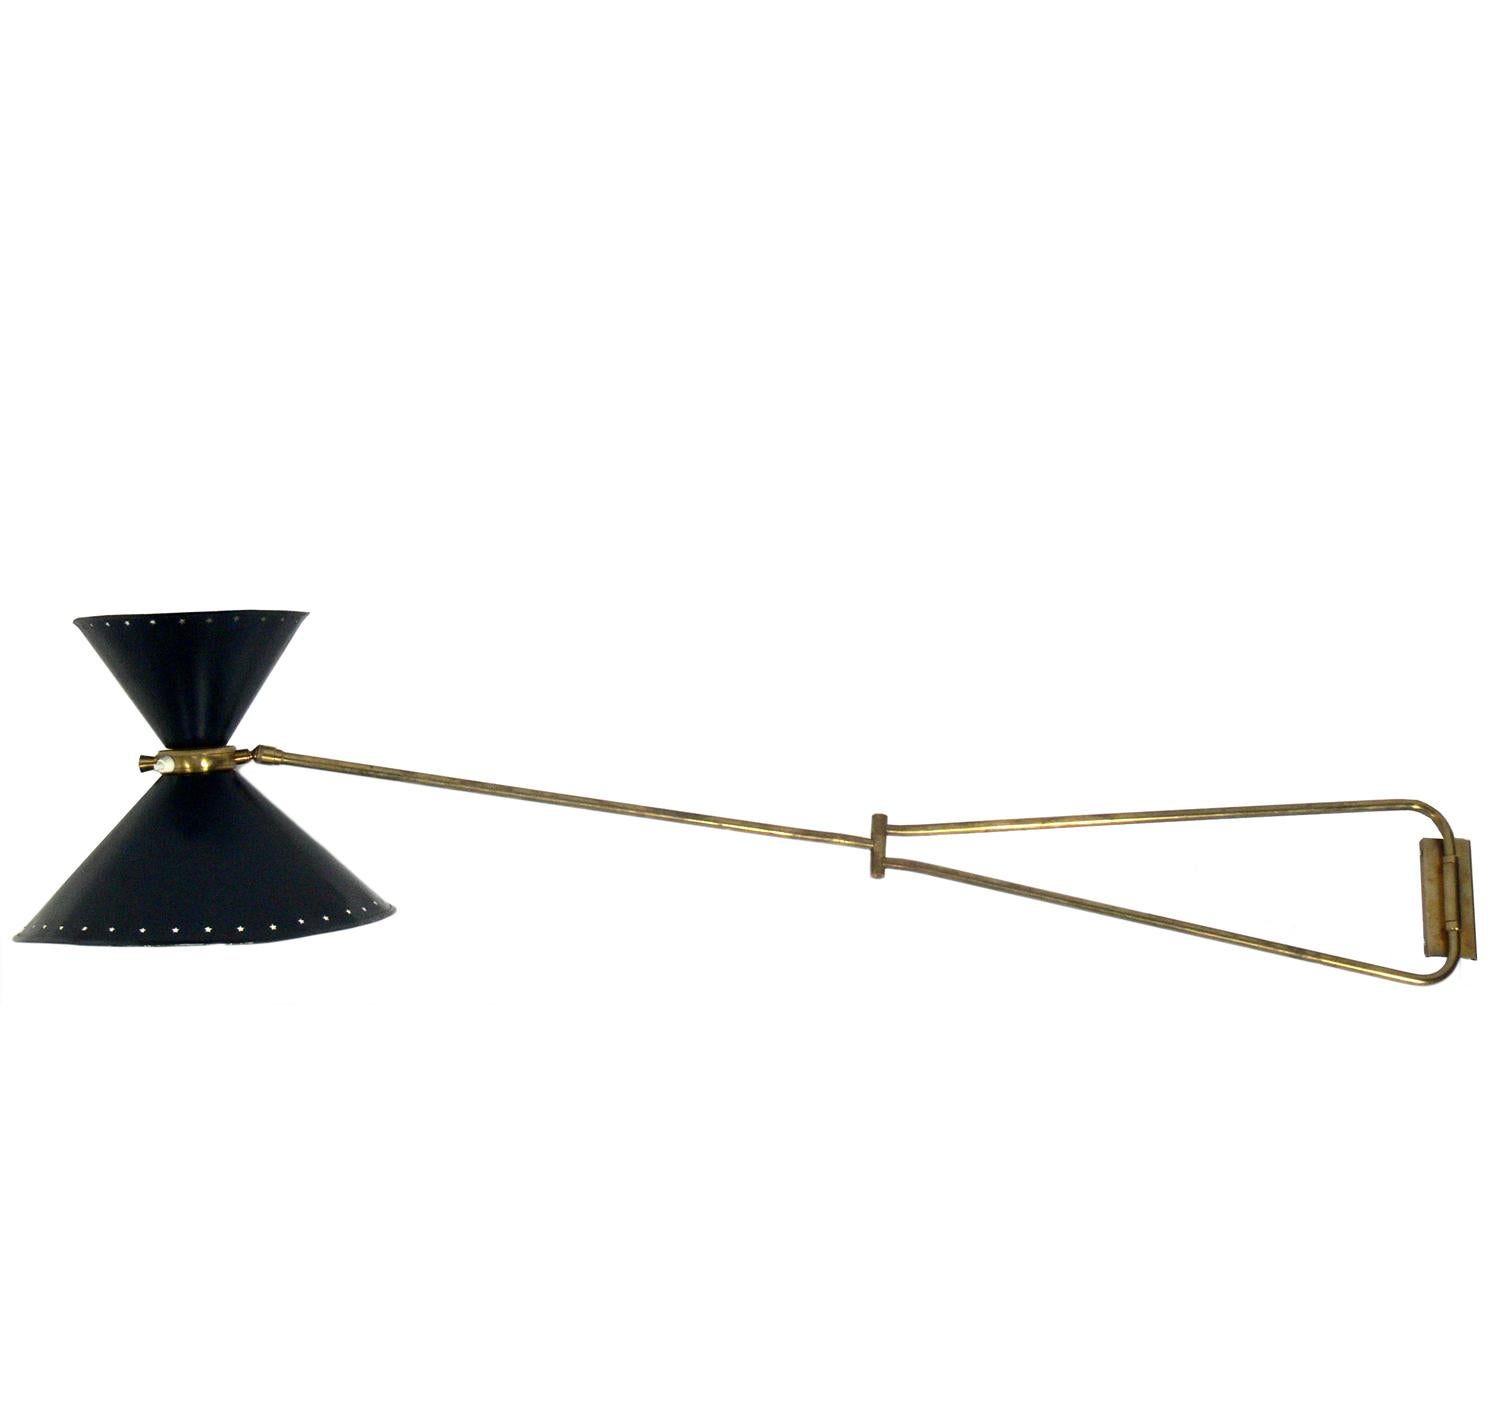 French Selection of Articulating Wall Sconces by Rene Mathieu for Maison Lunel